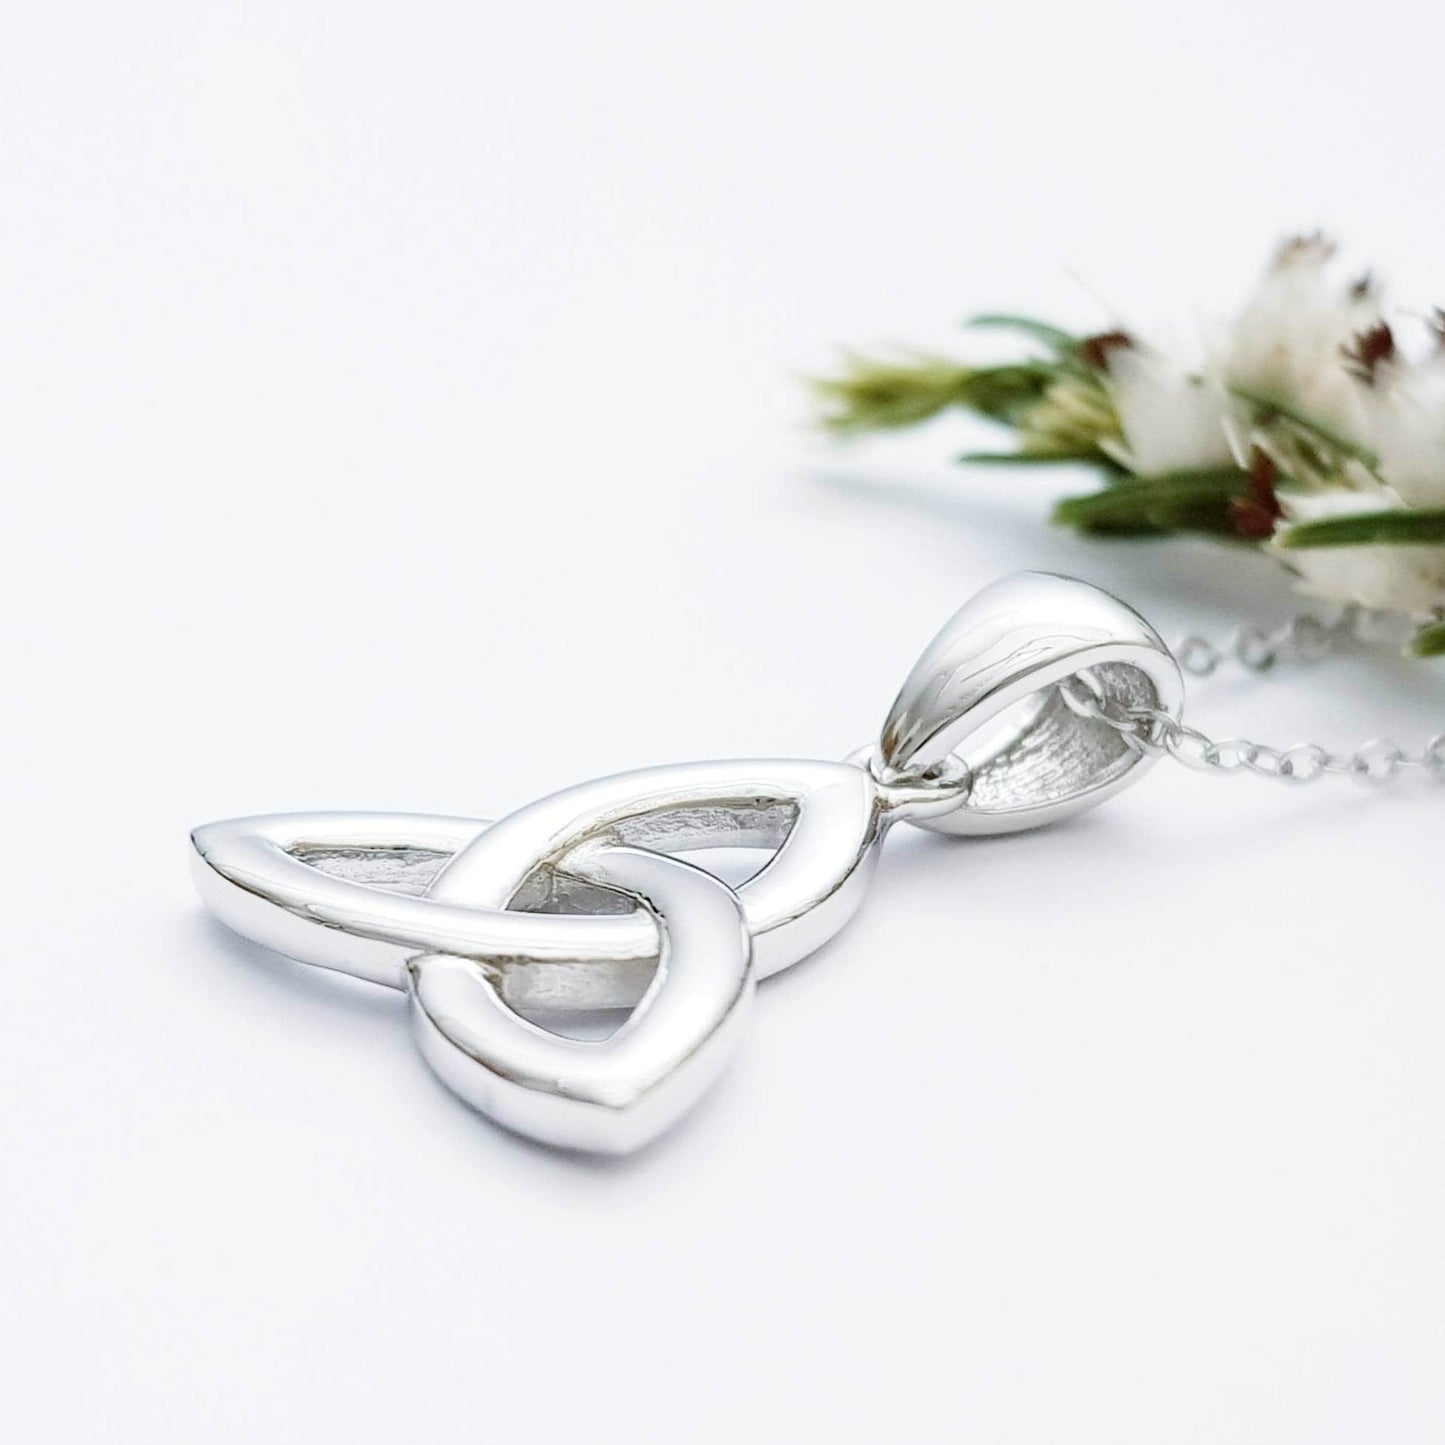 Classic Trinity knot celtic pendant, sterling silver celtic necklace made in Ireland, angel wing chain, triquetra necklace